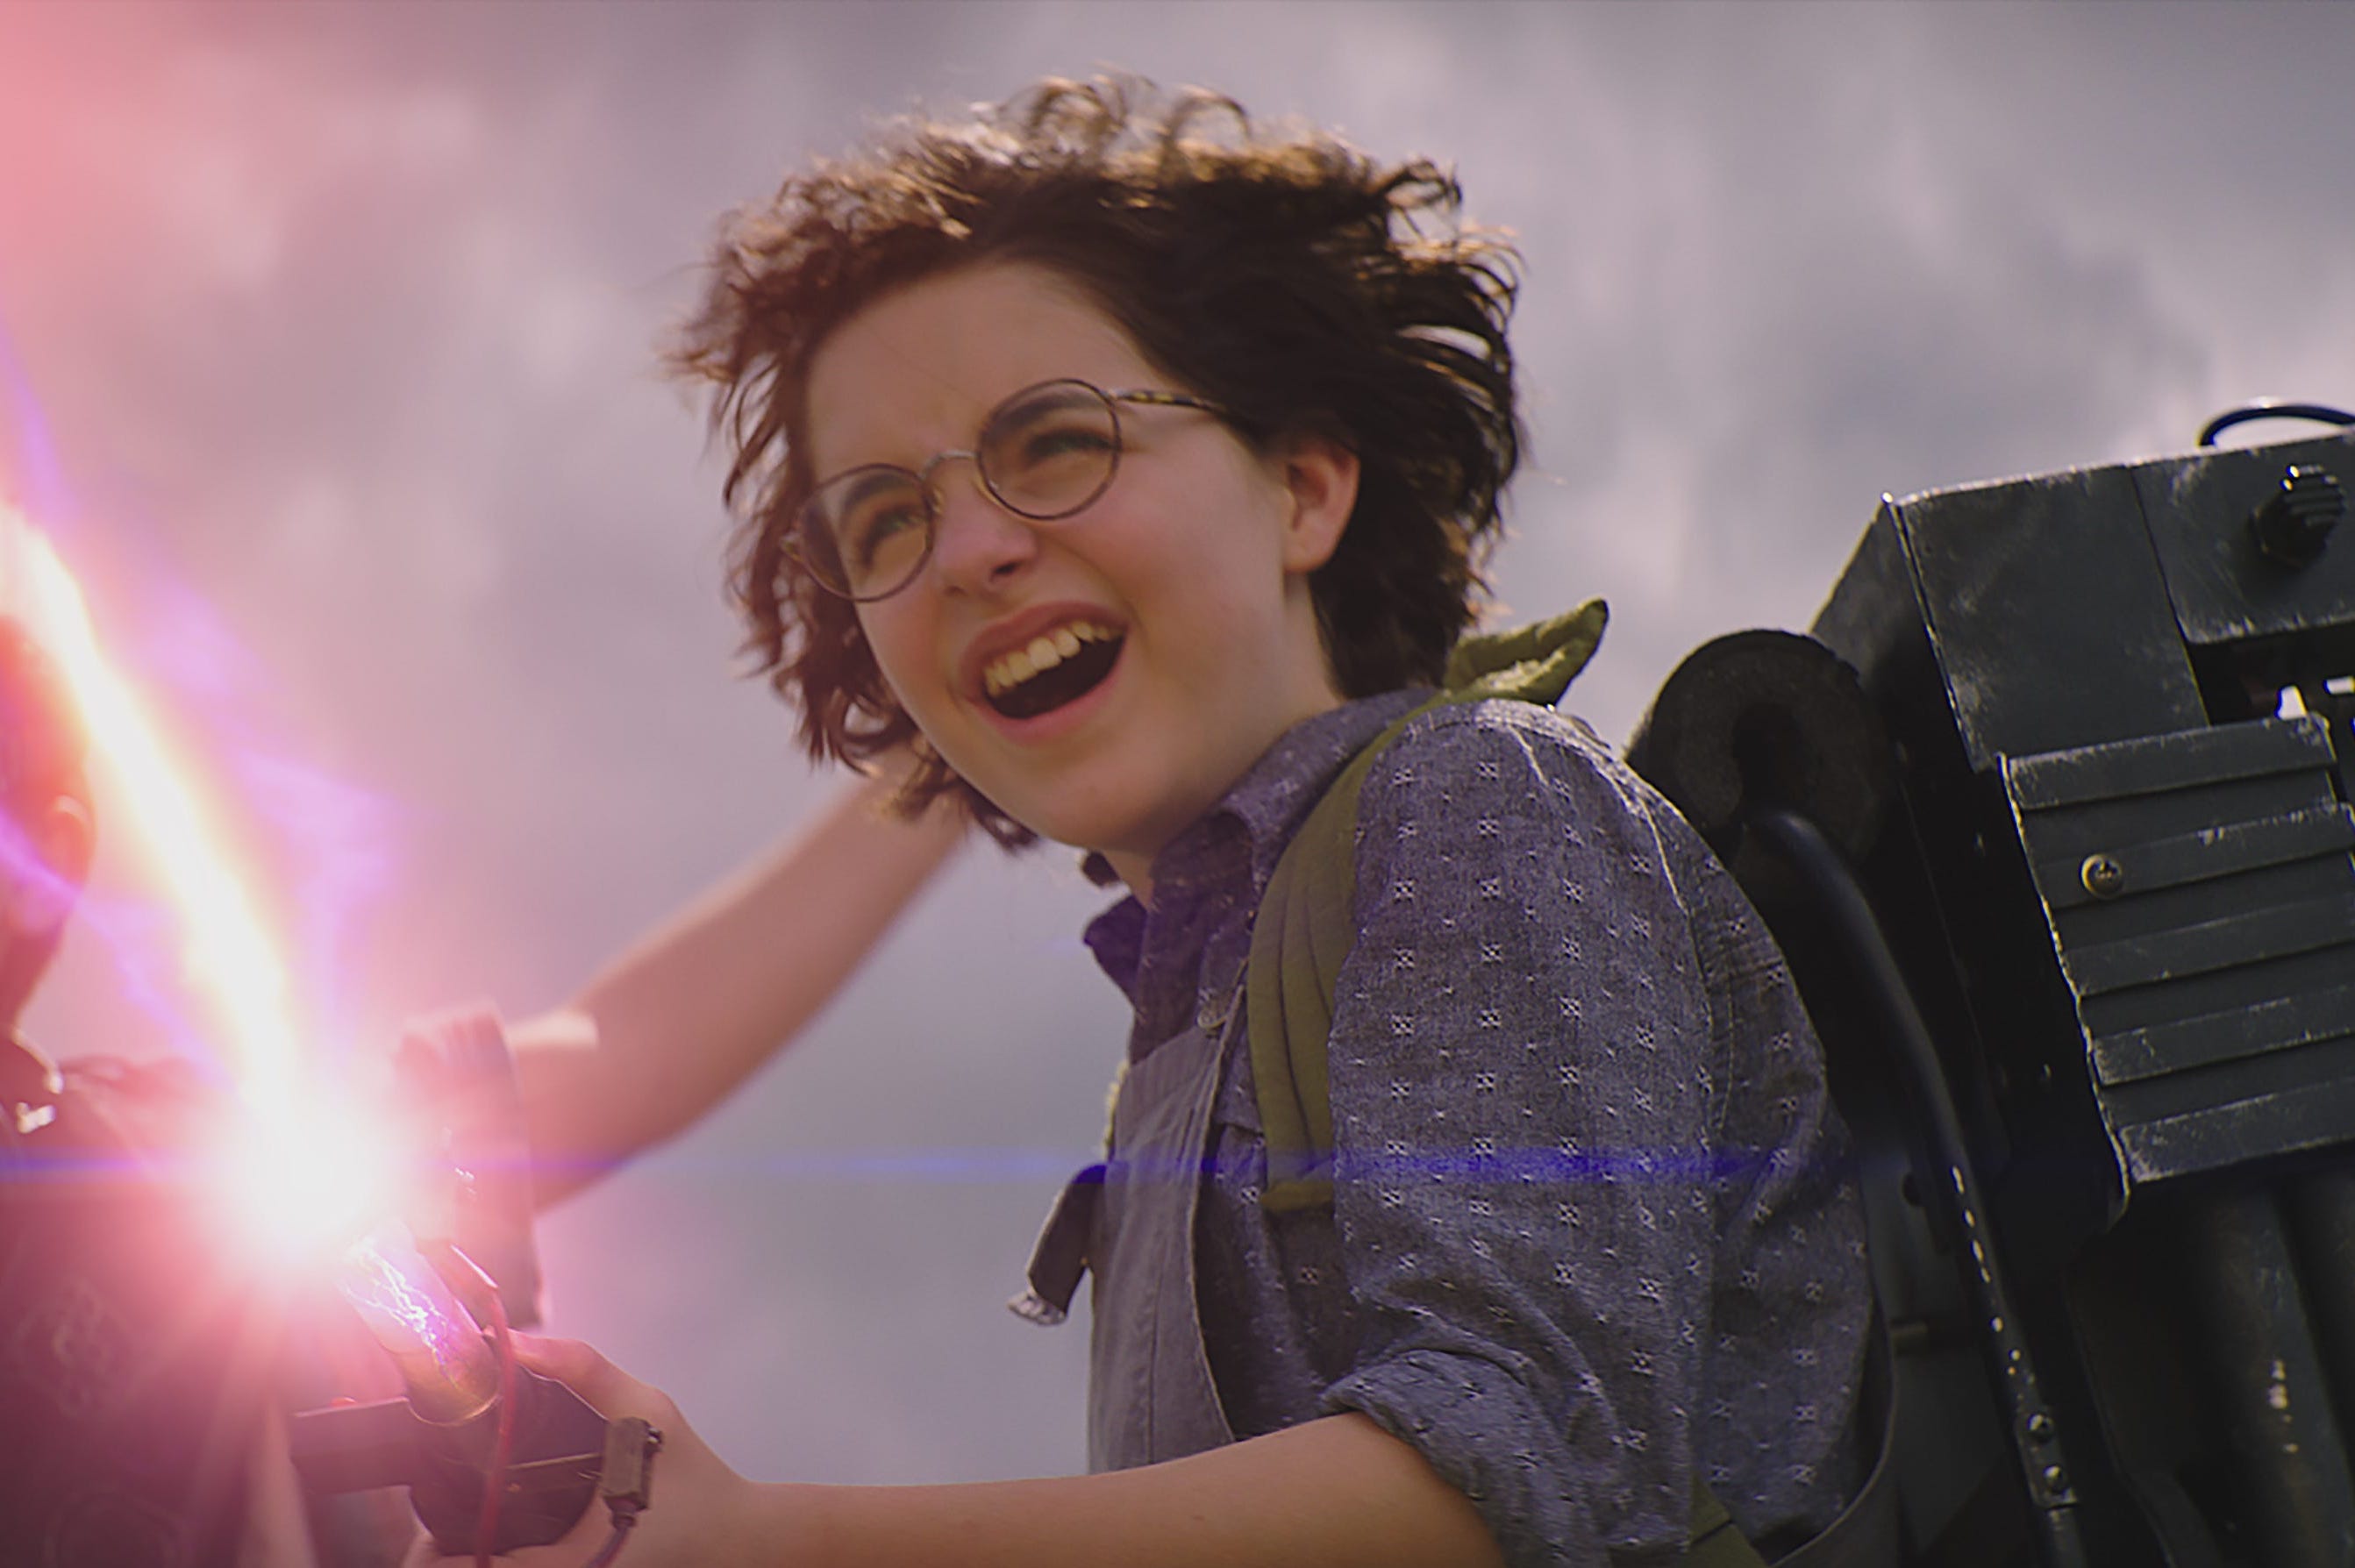 'Ghostbusters: Afterlife' Review: The Best Movie of the Franchise